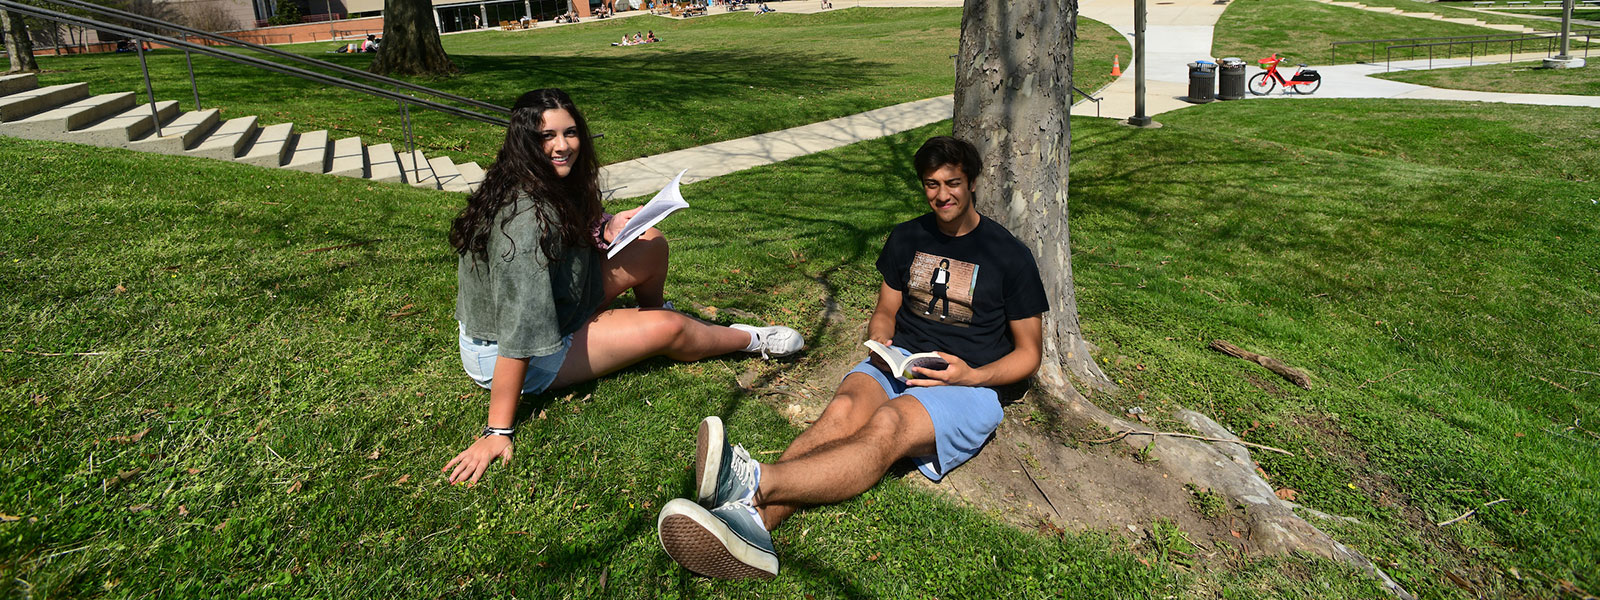 Male and female students sitting on lawn in front of student center